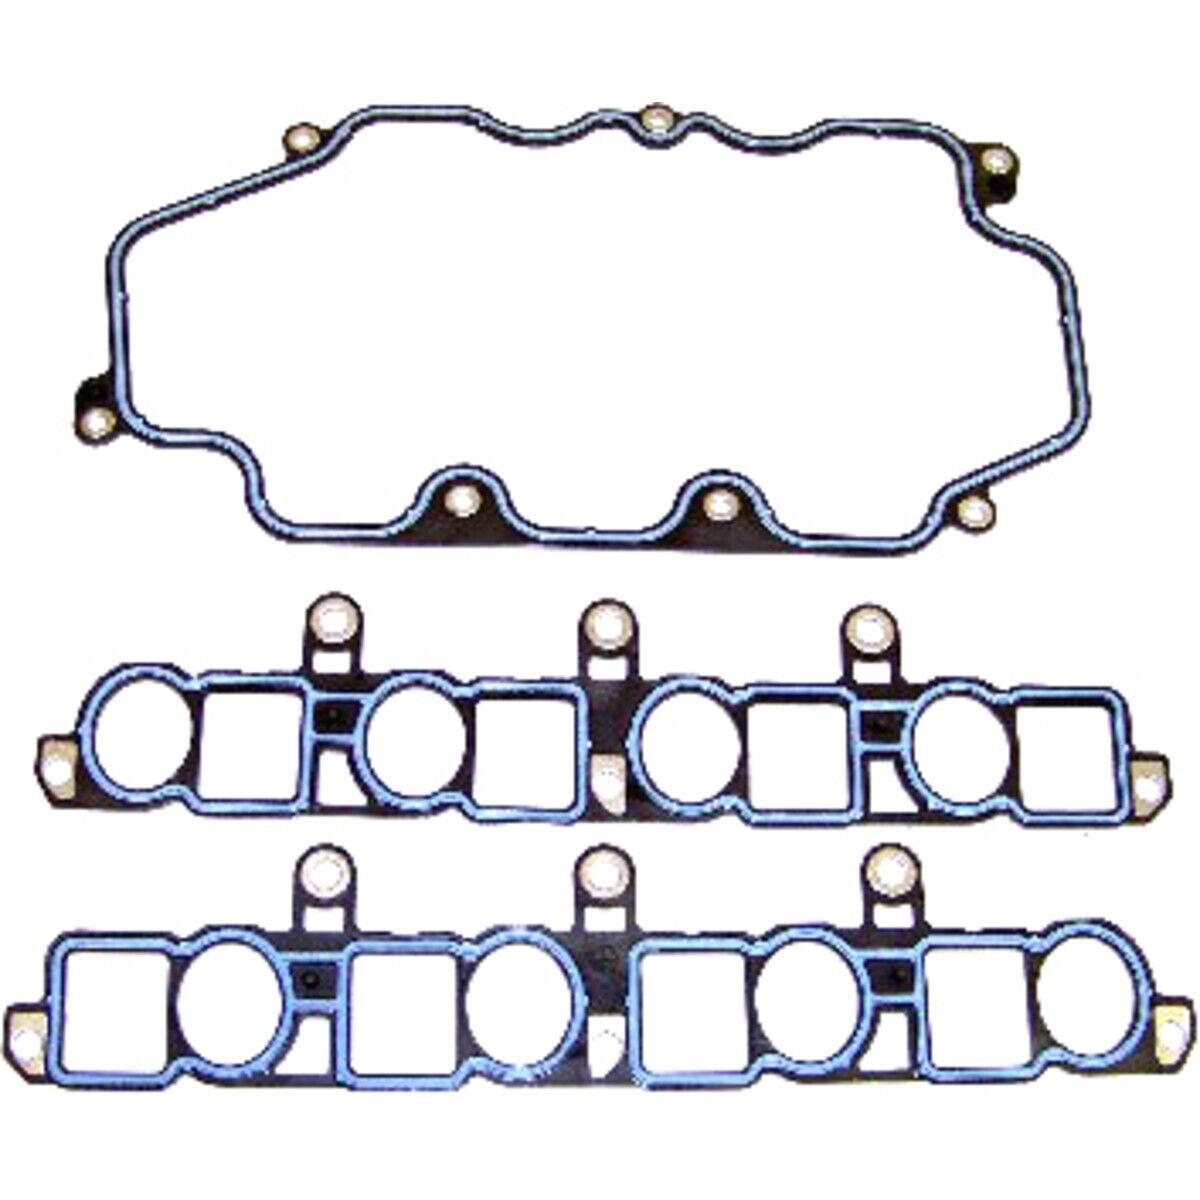 MG4171 DNJ Set of 3 Intake Plenum Gaskets for Ford Mustang Panoz AIV Roadster